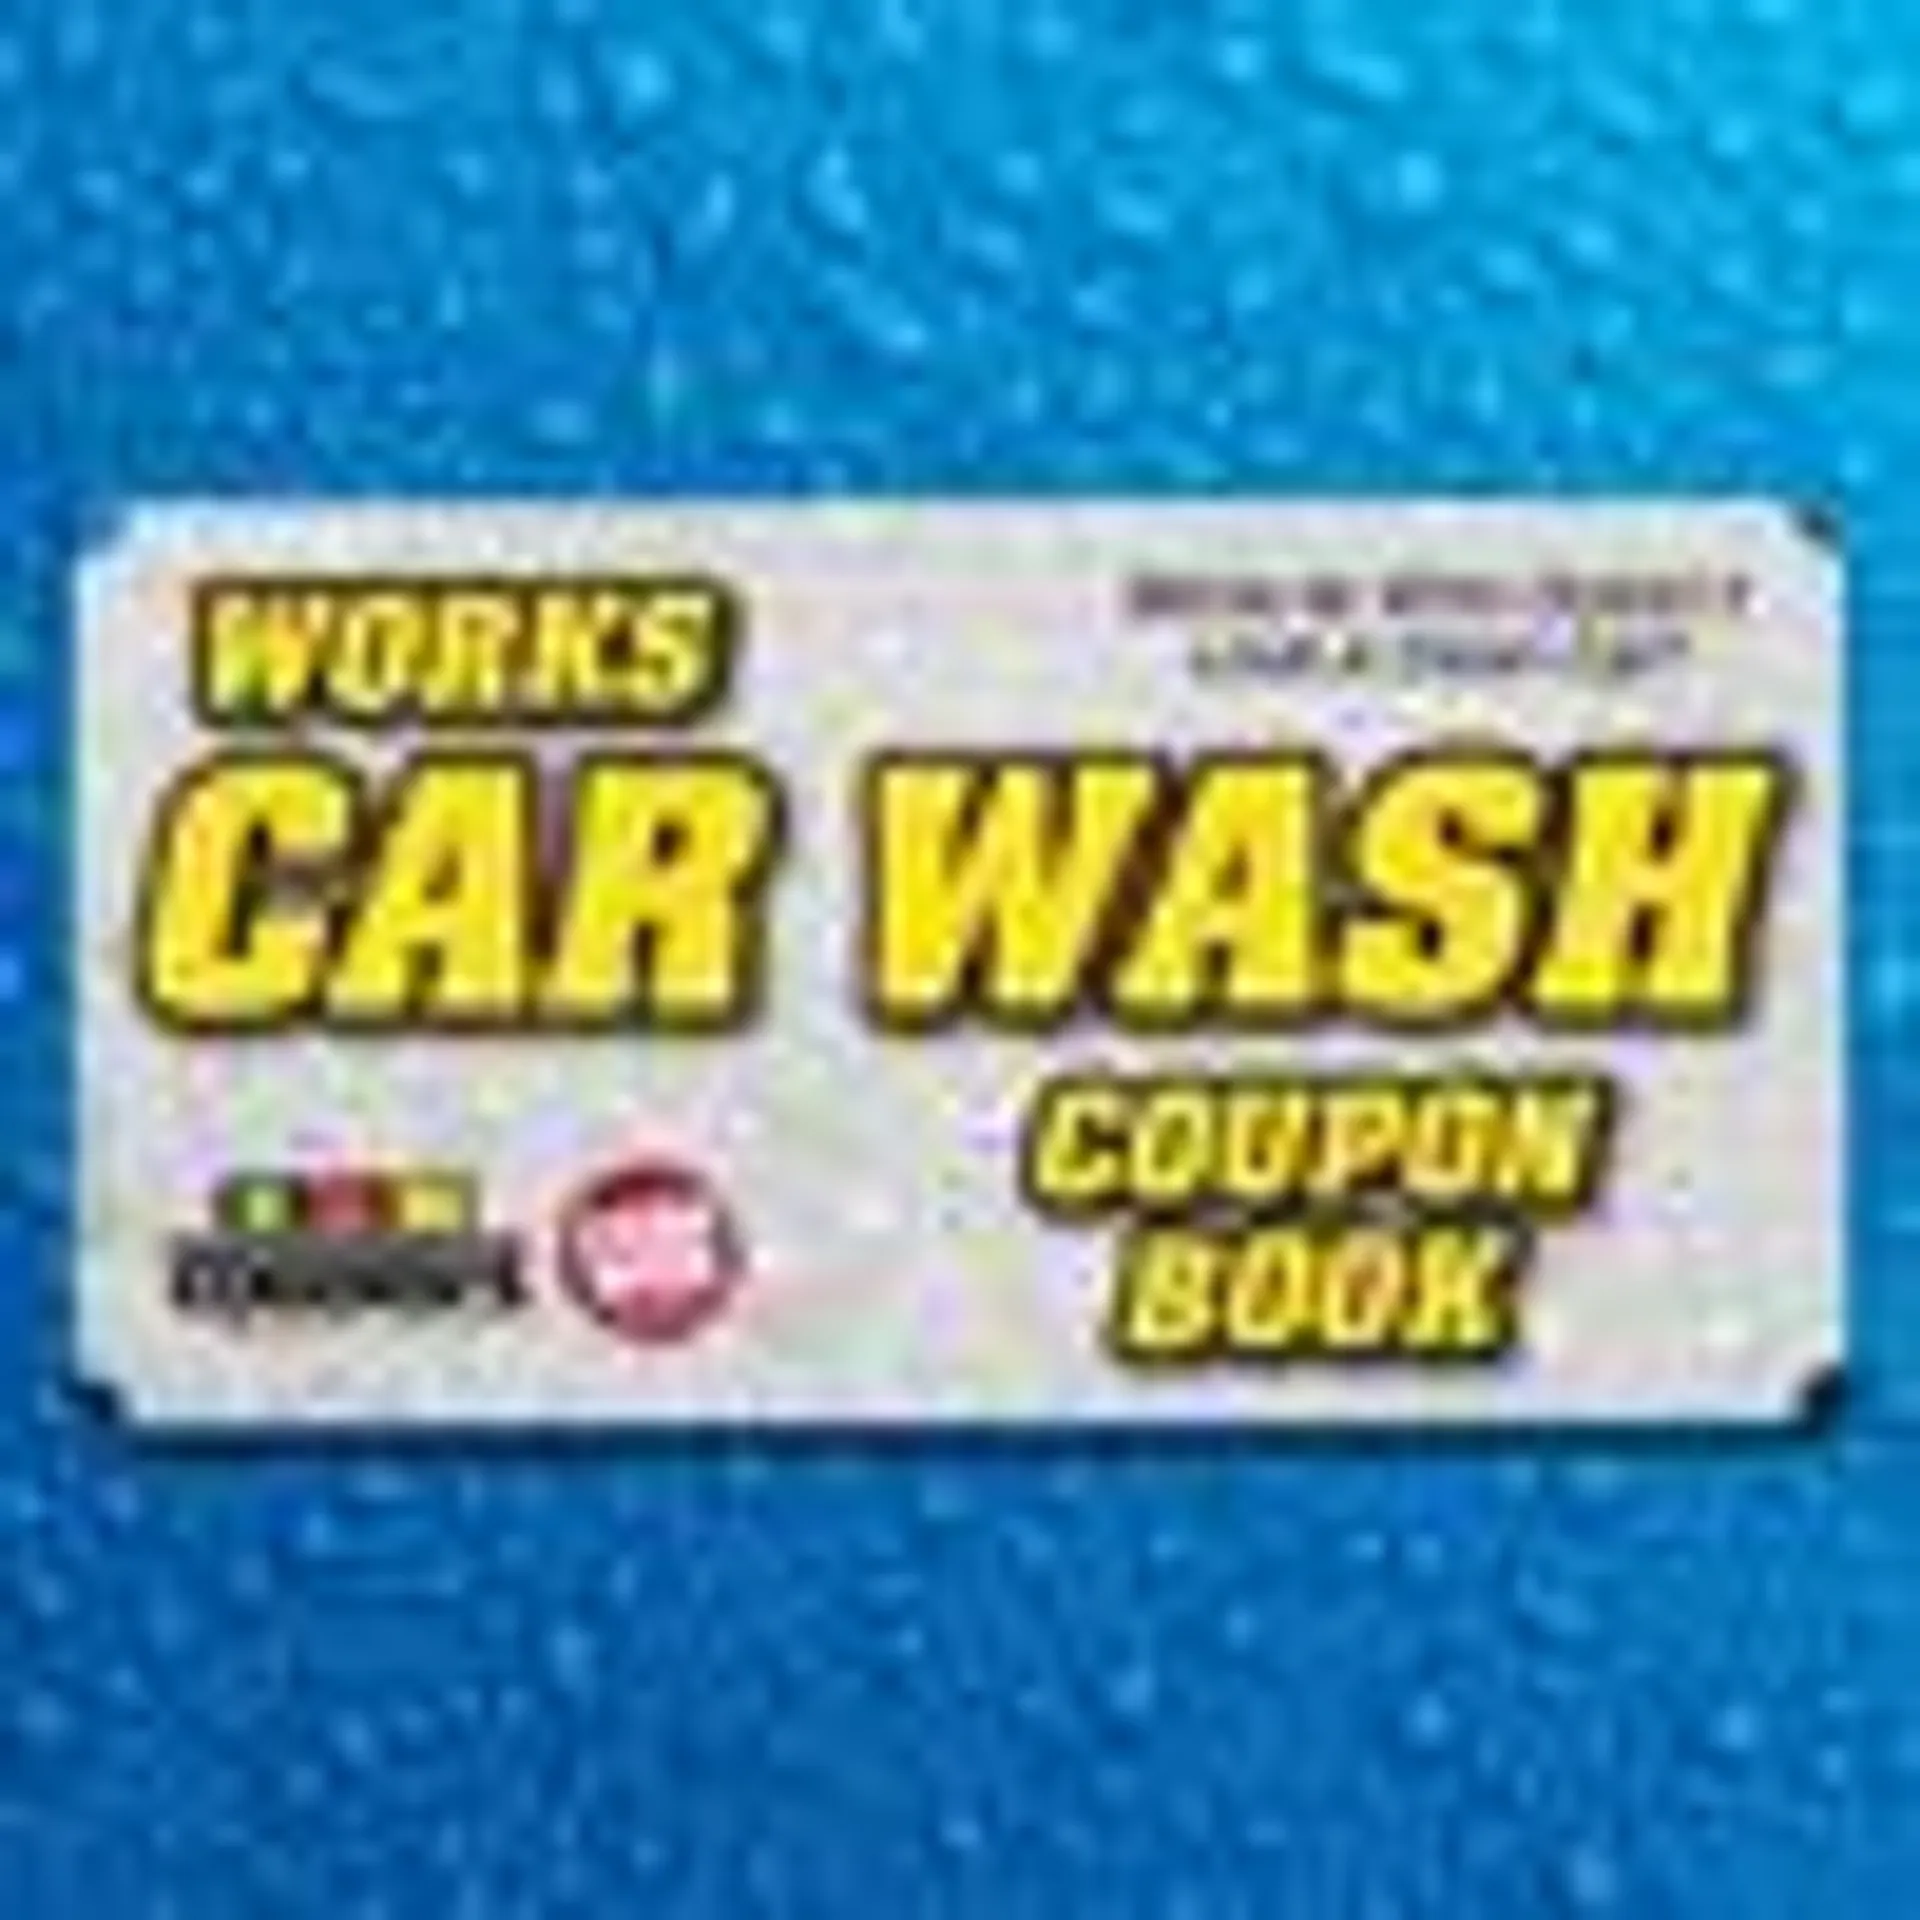 The Works Car Wash Coupon Book - 4 Ct.